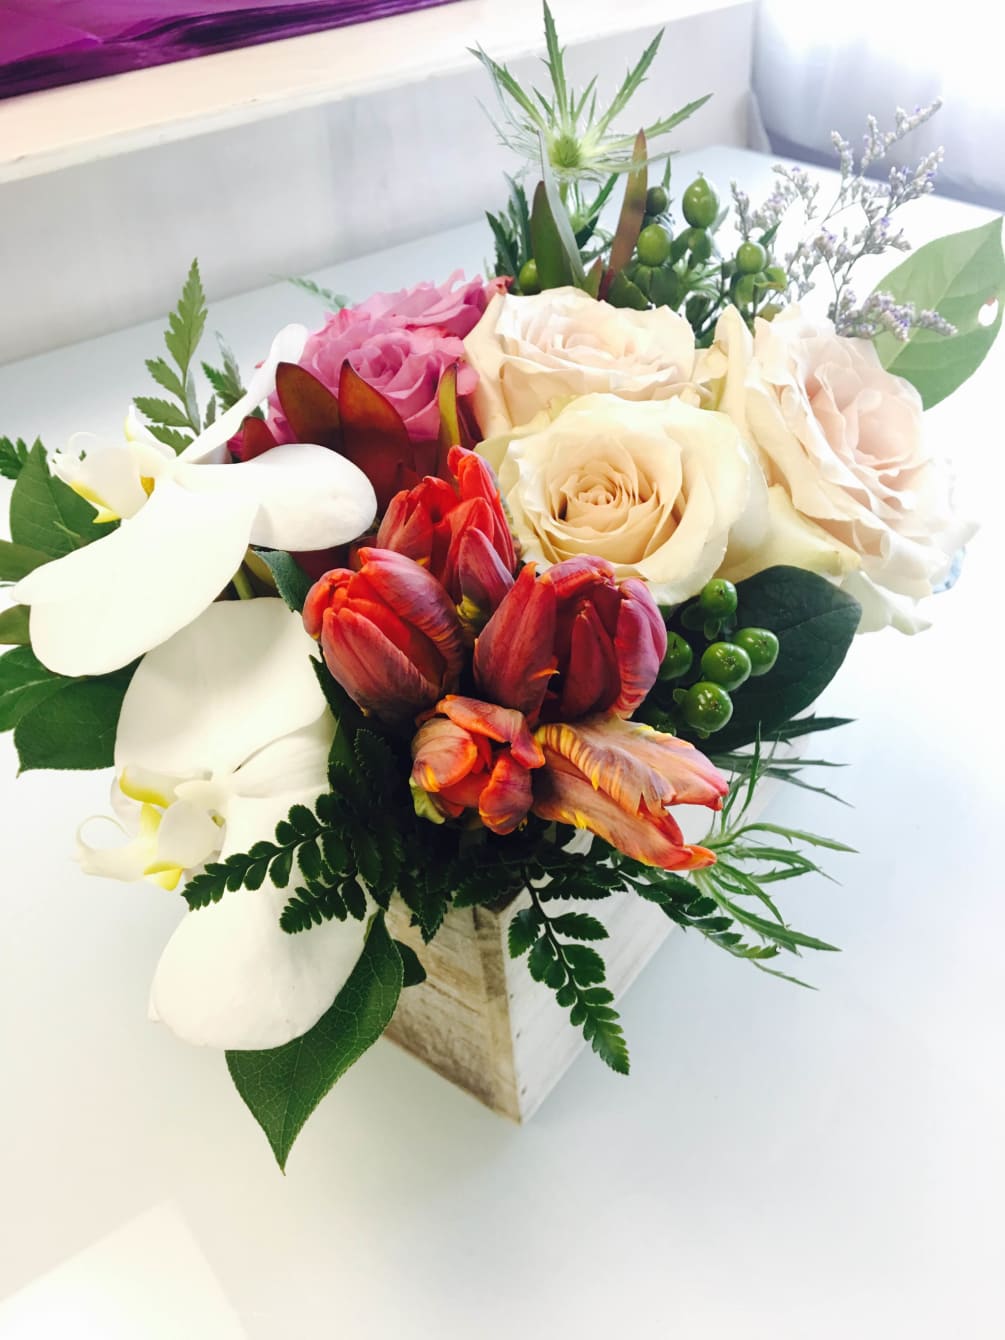 Enjoy this wooden white wash box of roses, tulips, orchids, and accented